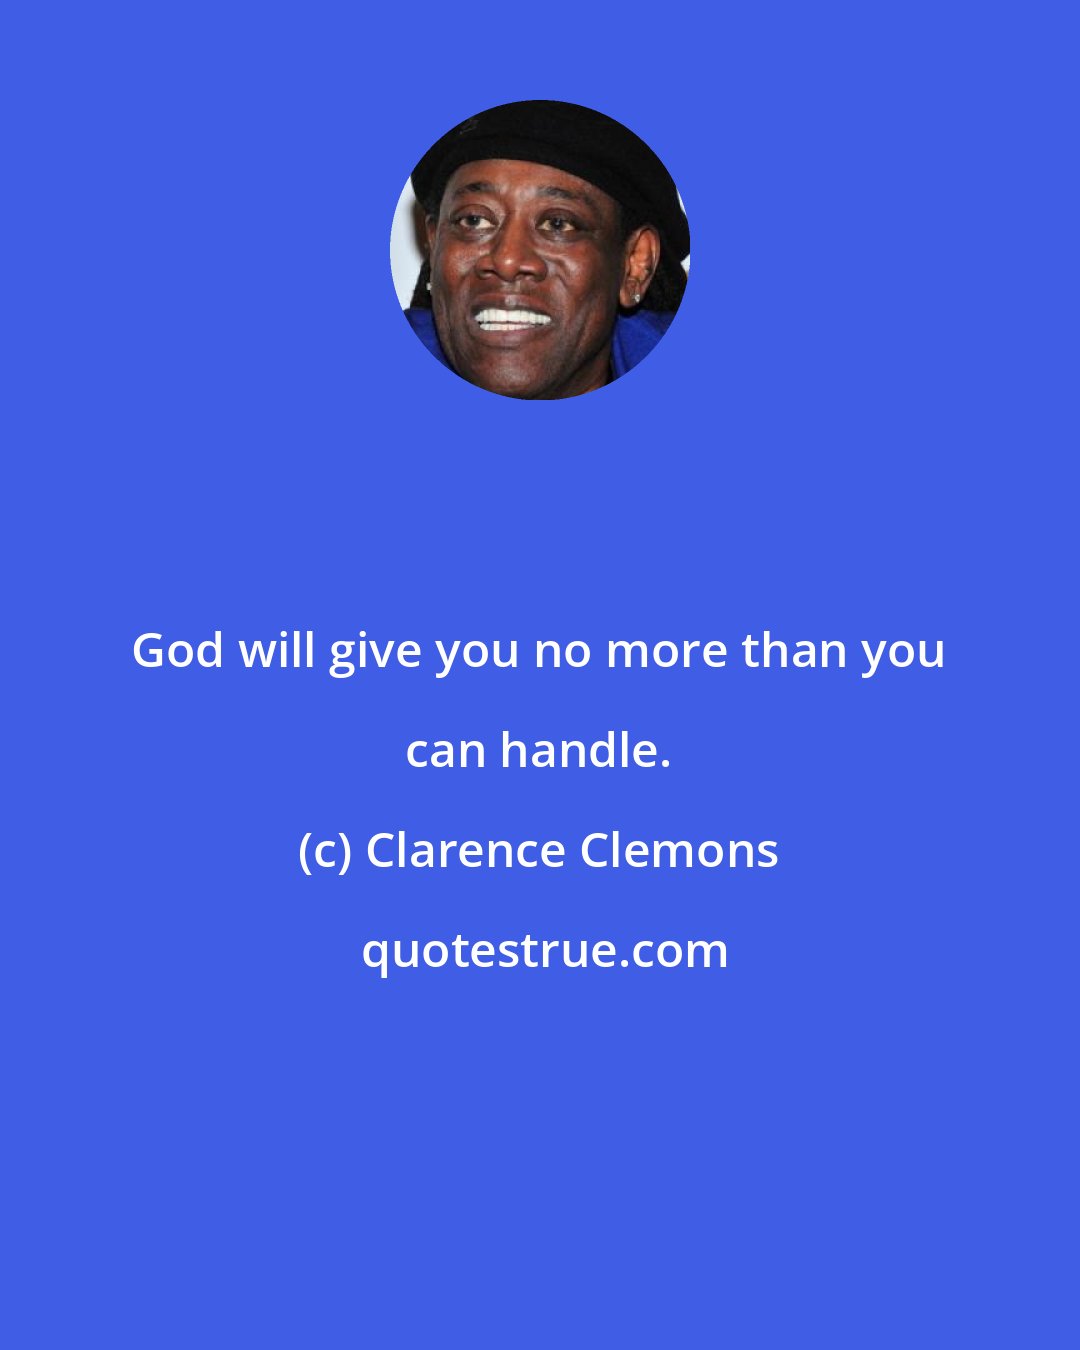 Clarence Clemons: God will give you no more than you can handle.